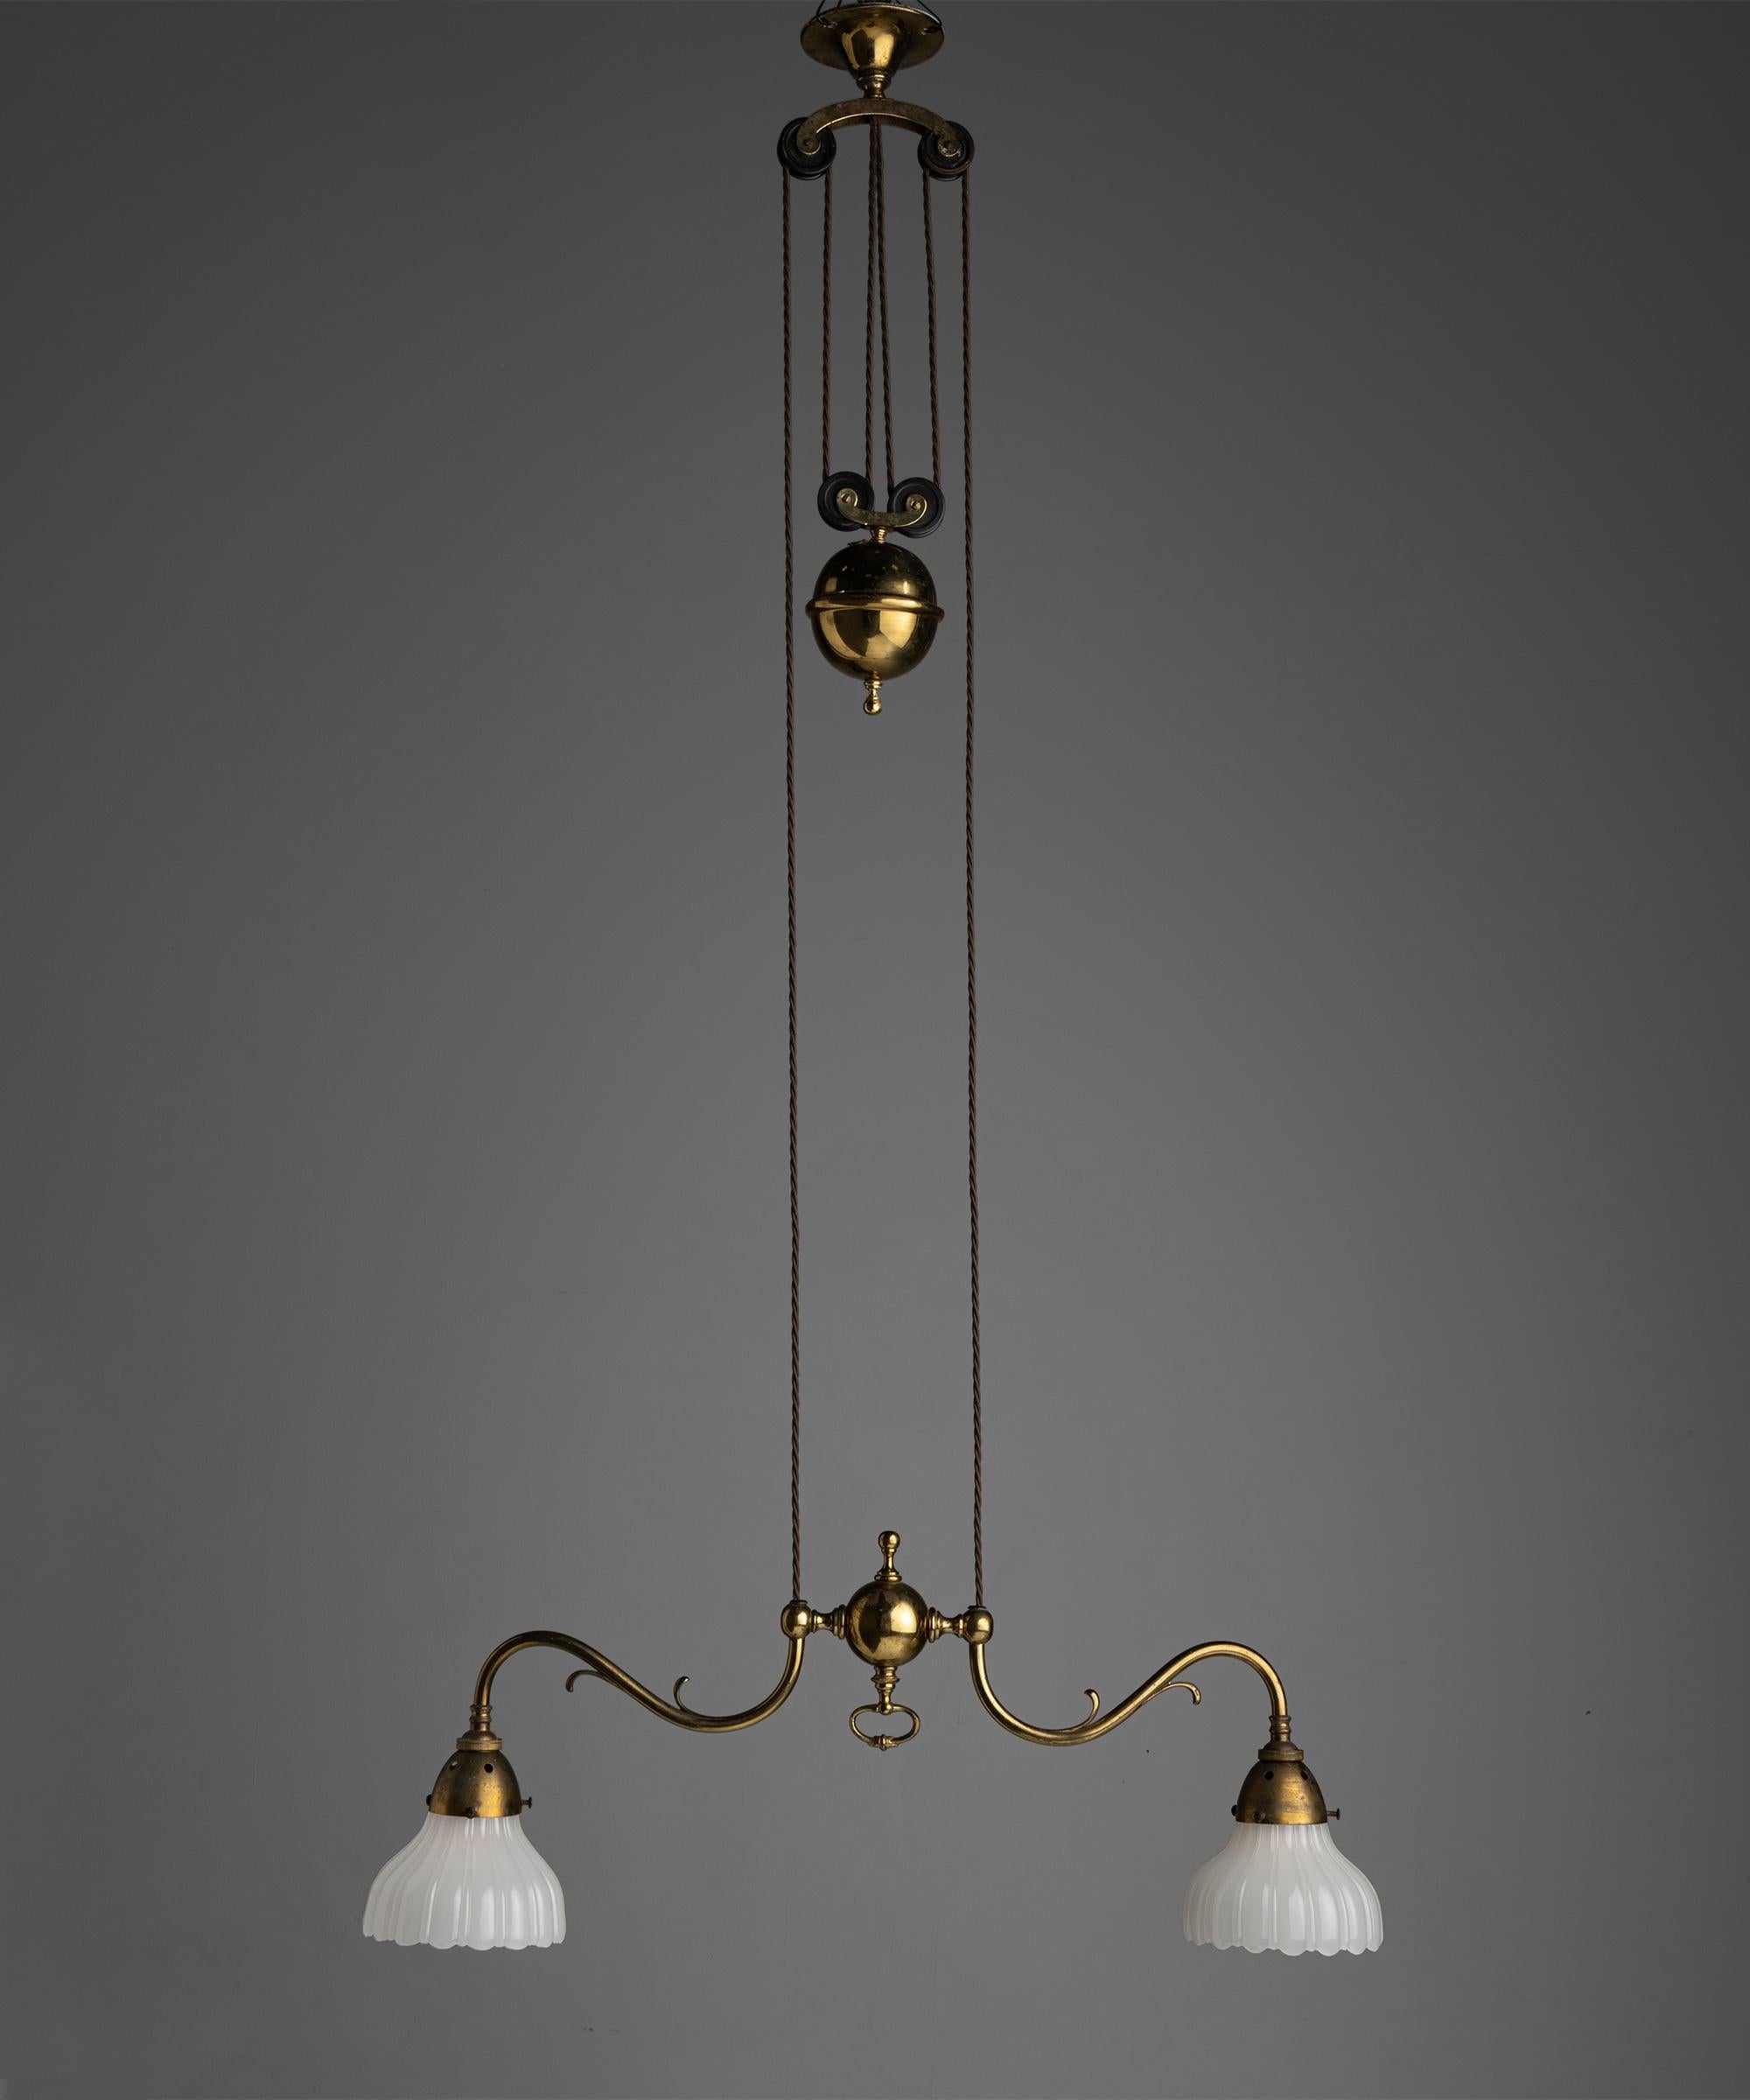 Rise & fall gilt brass chandeliers
England circa 1910

Brass framework with pulley system, and original Jefferson Moonstone Glass Shades

Measures: 27” W x 4” D x 39.5” H-68.5” H

$ 6,200 each.


 